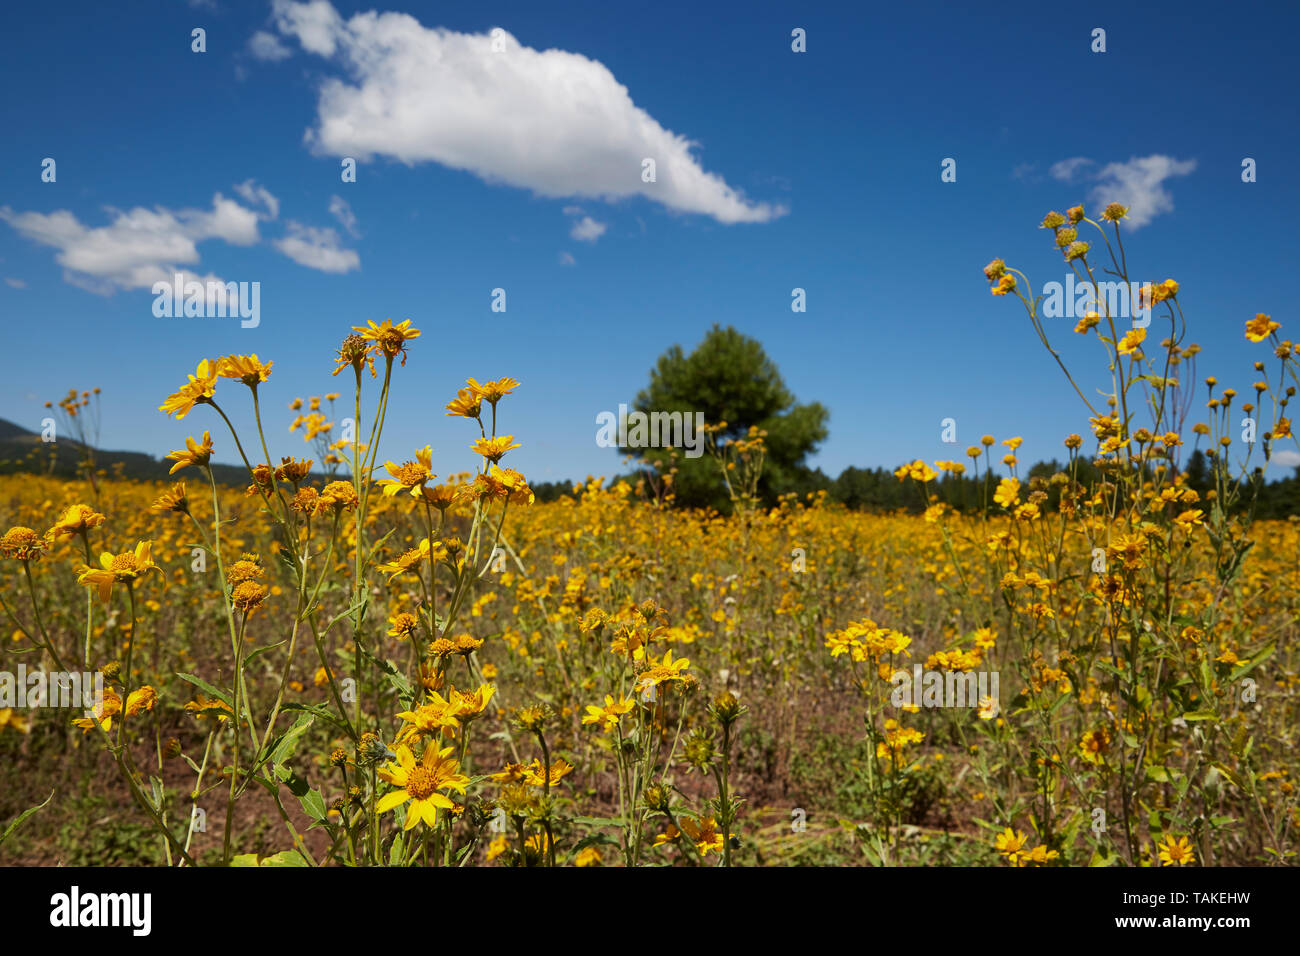 Field of yellow flowers with blue sky, green tree, and fluffy white clouds. Stock Photo